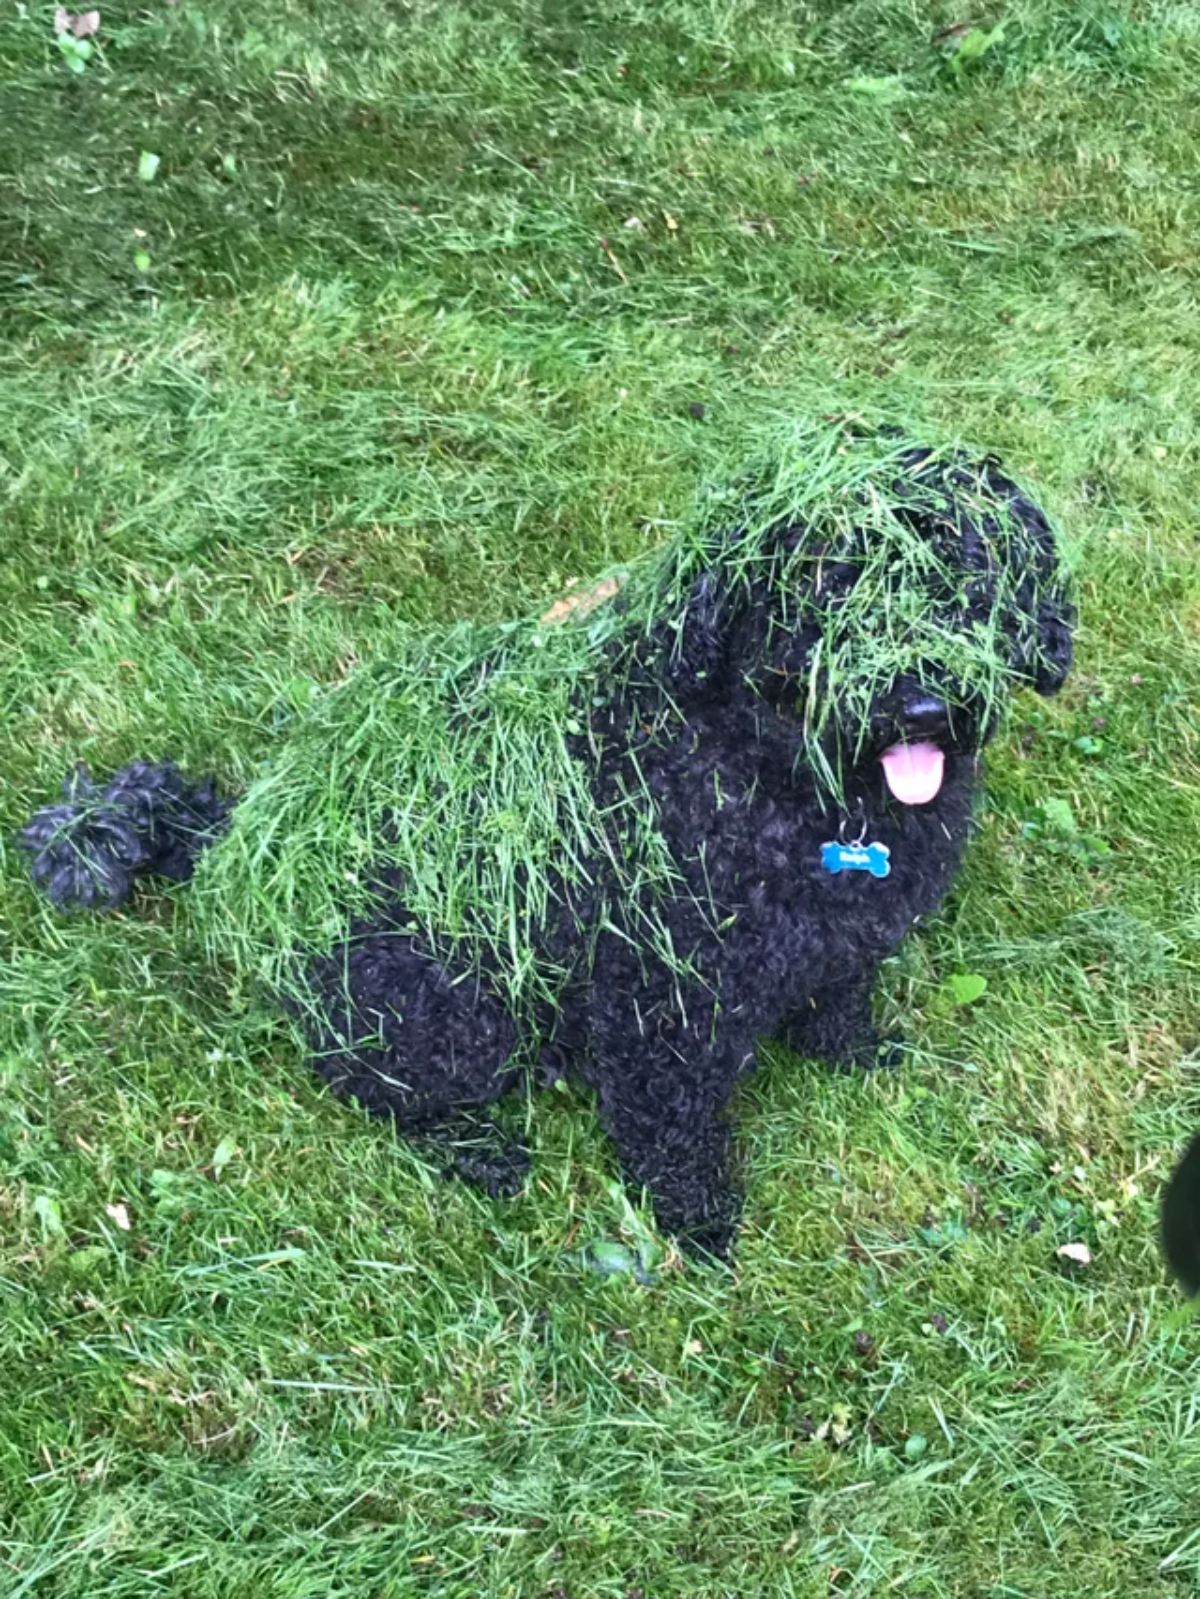 black dog sitting on grass covered in grass